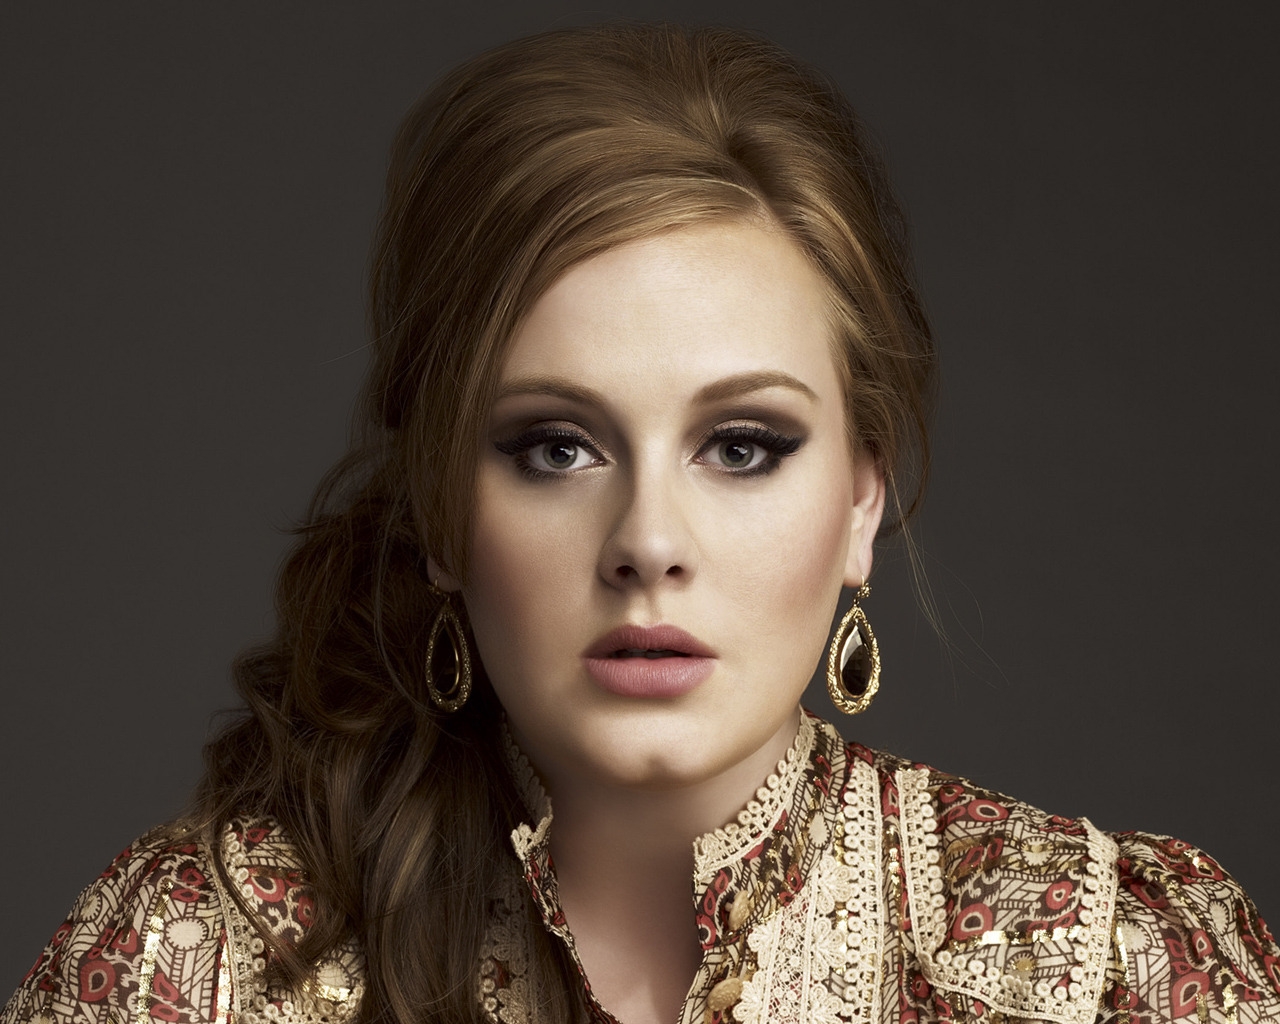 Adele Laurie Blue Adkins for 1280 x 1024 resolution